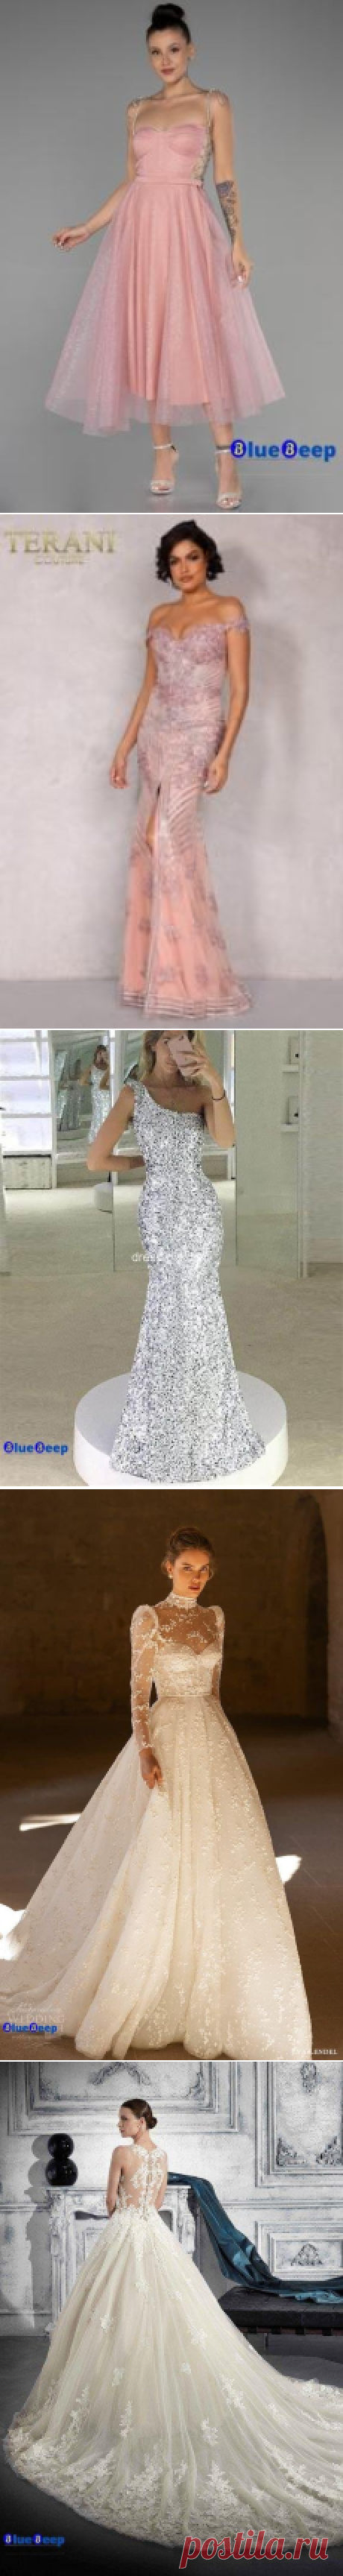 Sparkling in Silver: Glamorous Soiree Dresses for the Fashion-forward